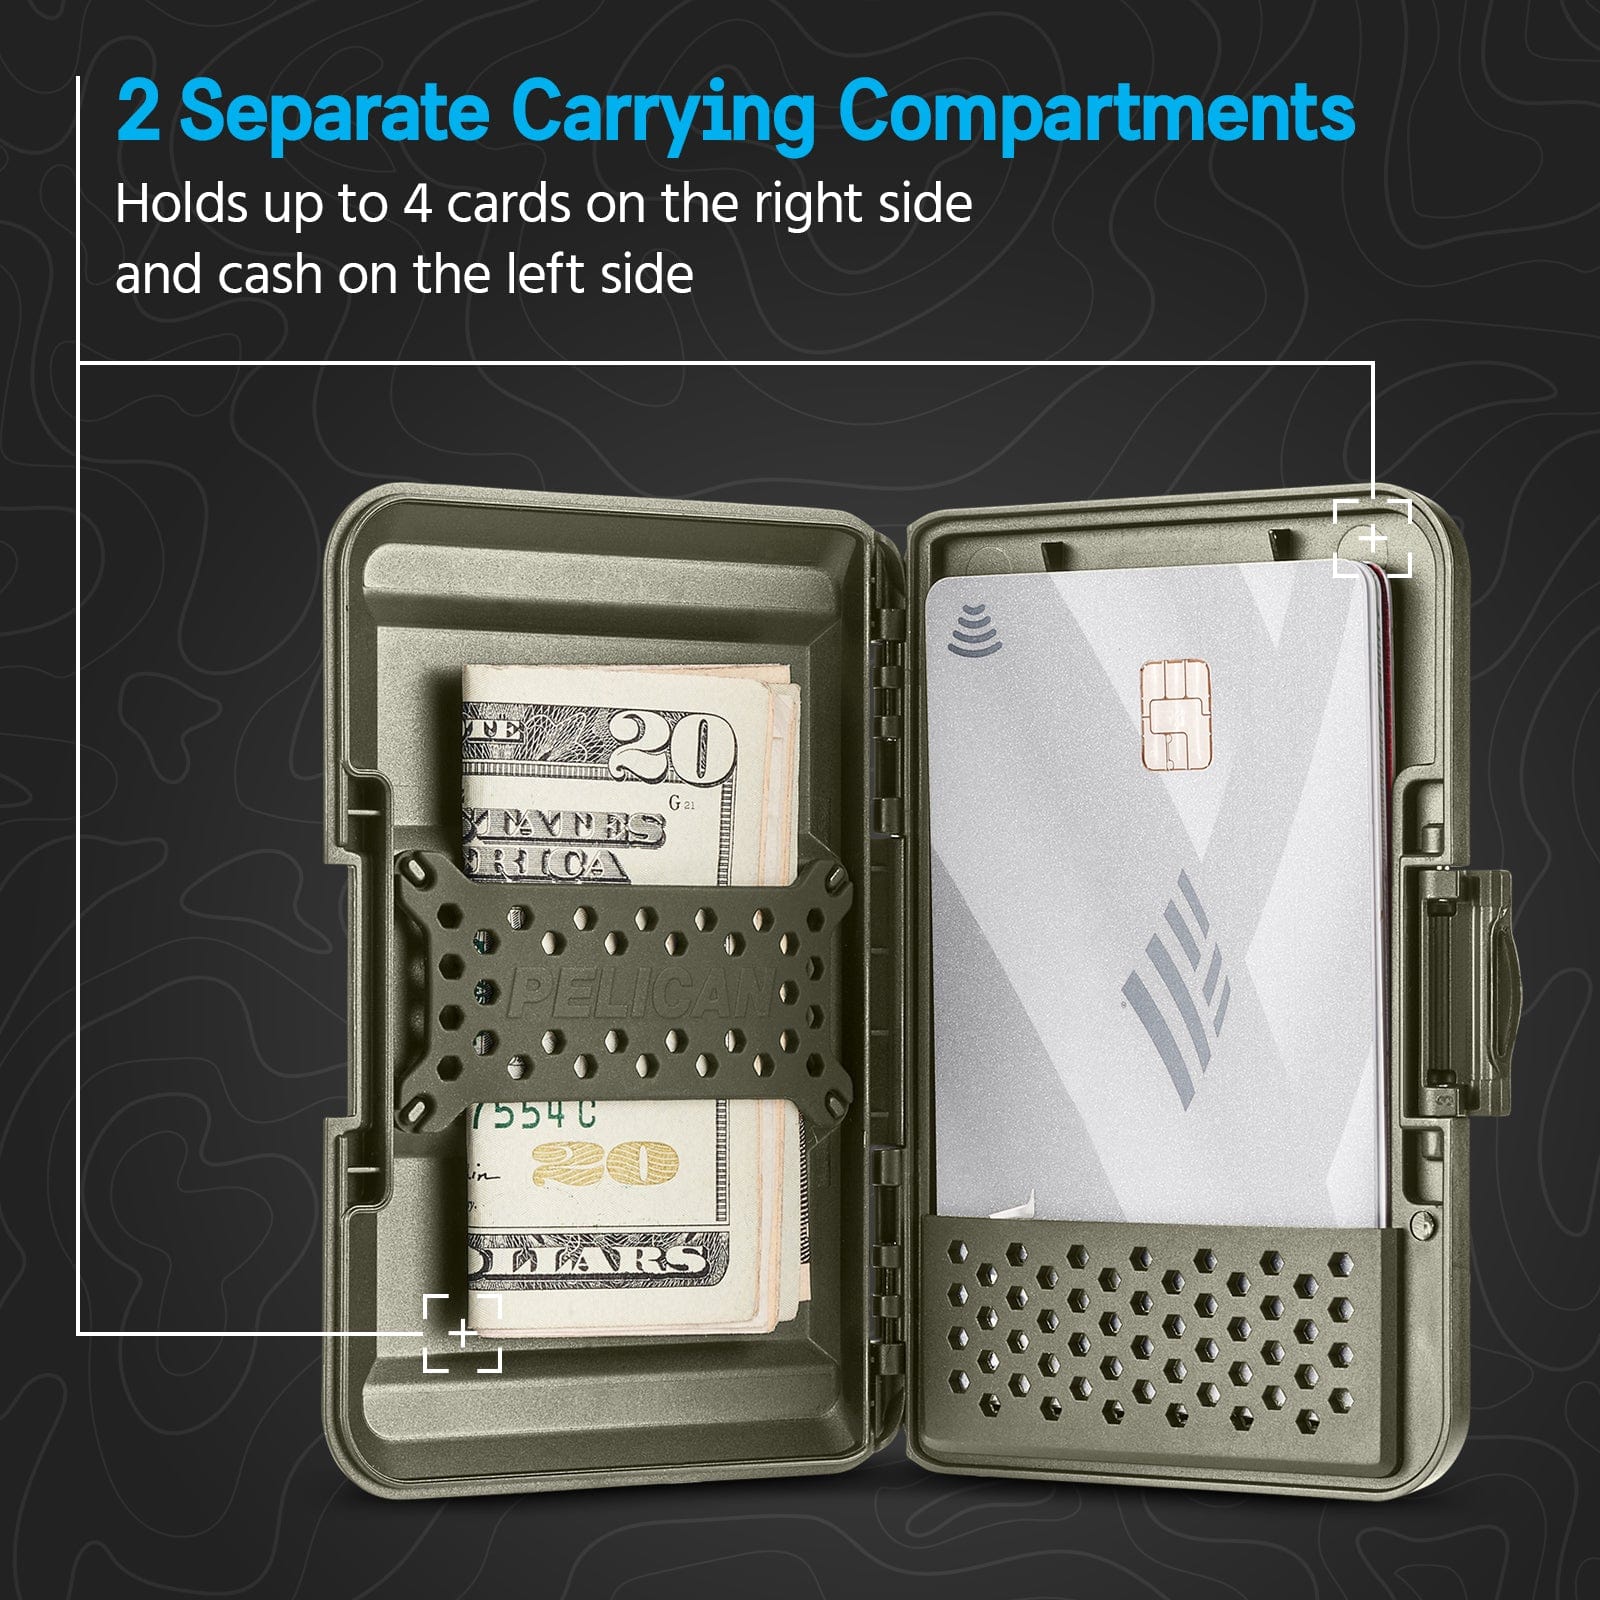 2 SEPARATE CARRYING COMPARTMENTS. HOLDS UP TO 4 CARDS ON THE RIGHT SIDE AND CASH ON THE LEFT SIDE. 